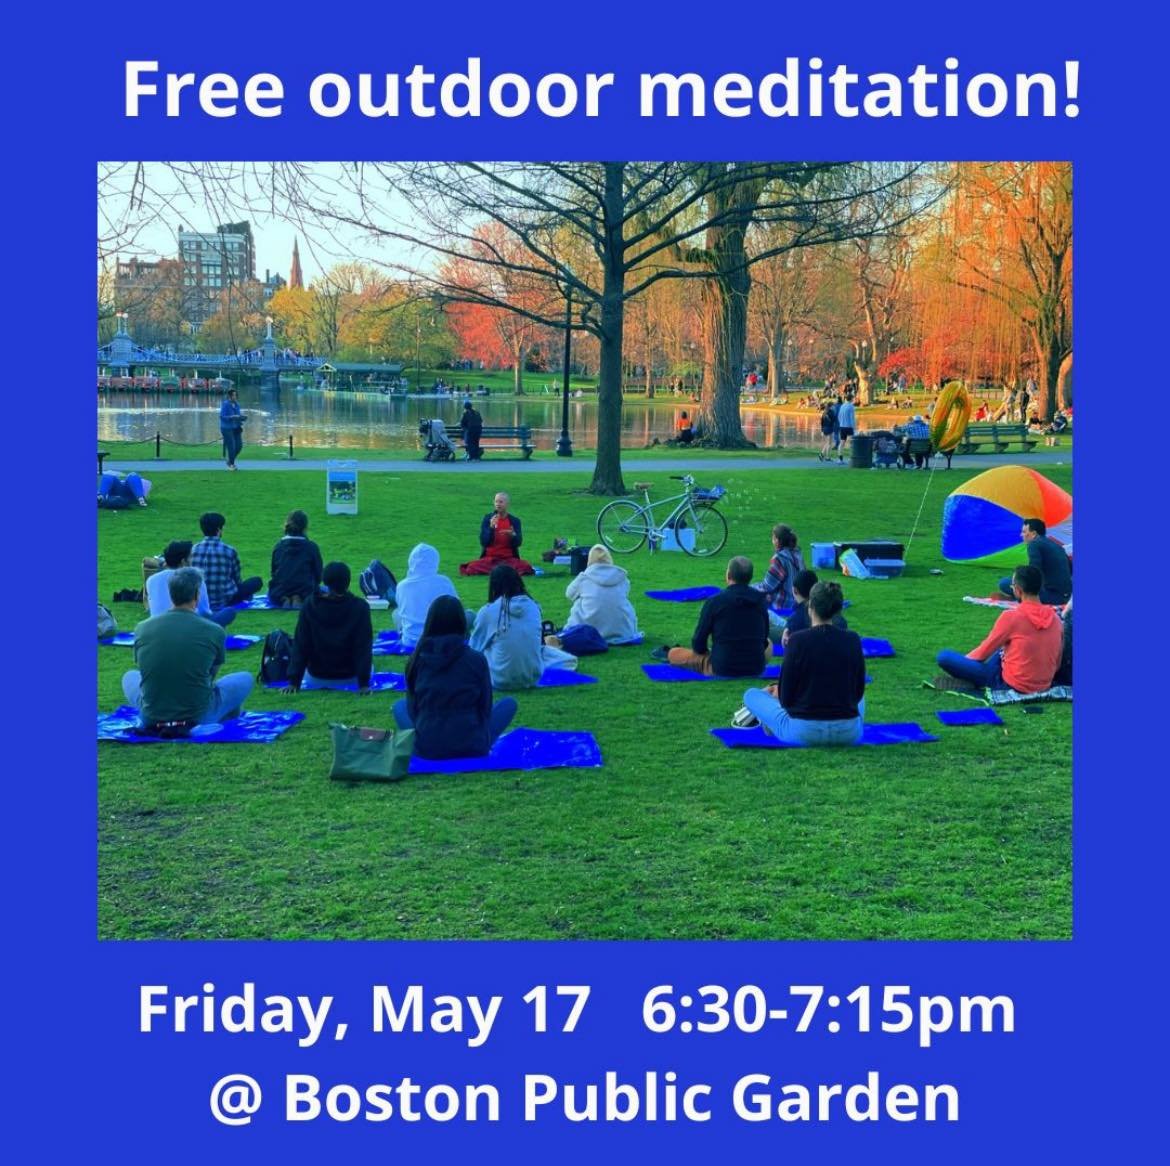 Free outdoor meditation at Boston Public Garden this Friday, May 17 at 6:30pm. Lagoon edge, Boylston side. Find some calm in this great city and have some fun with other meditators.

Sign up free at:
https://www.meditationinboston.org/outdoor-meditat